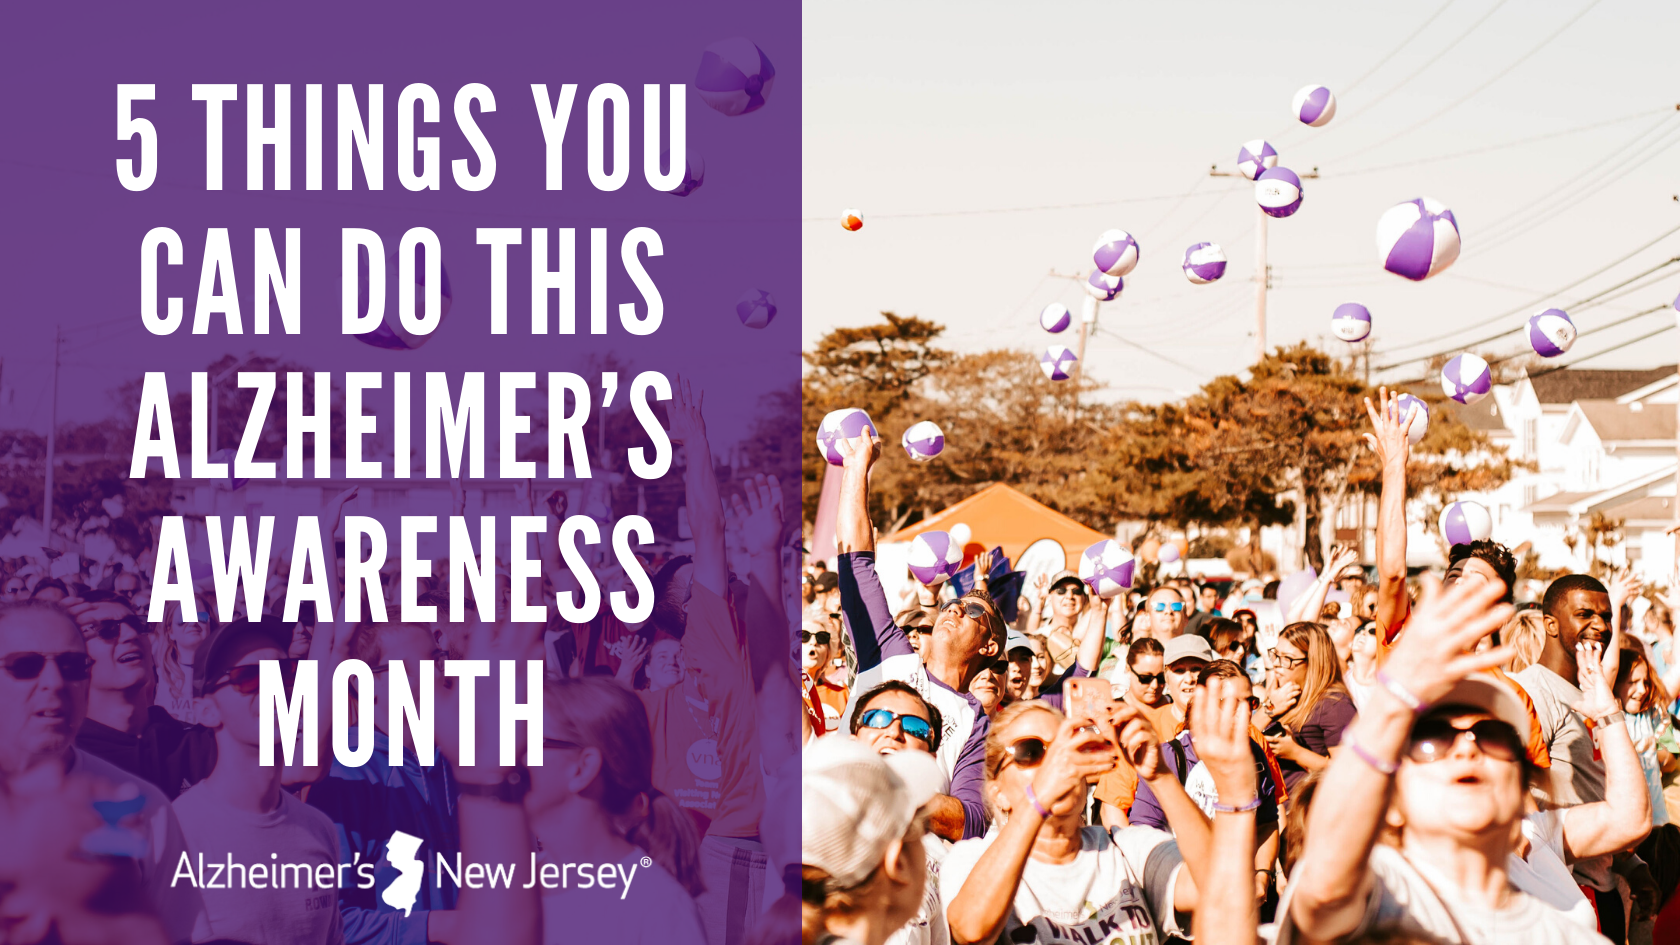 5 Things You Can Do This Alzheimer’s Awareness Month copy